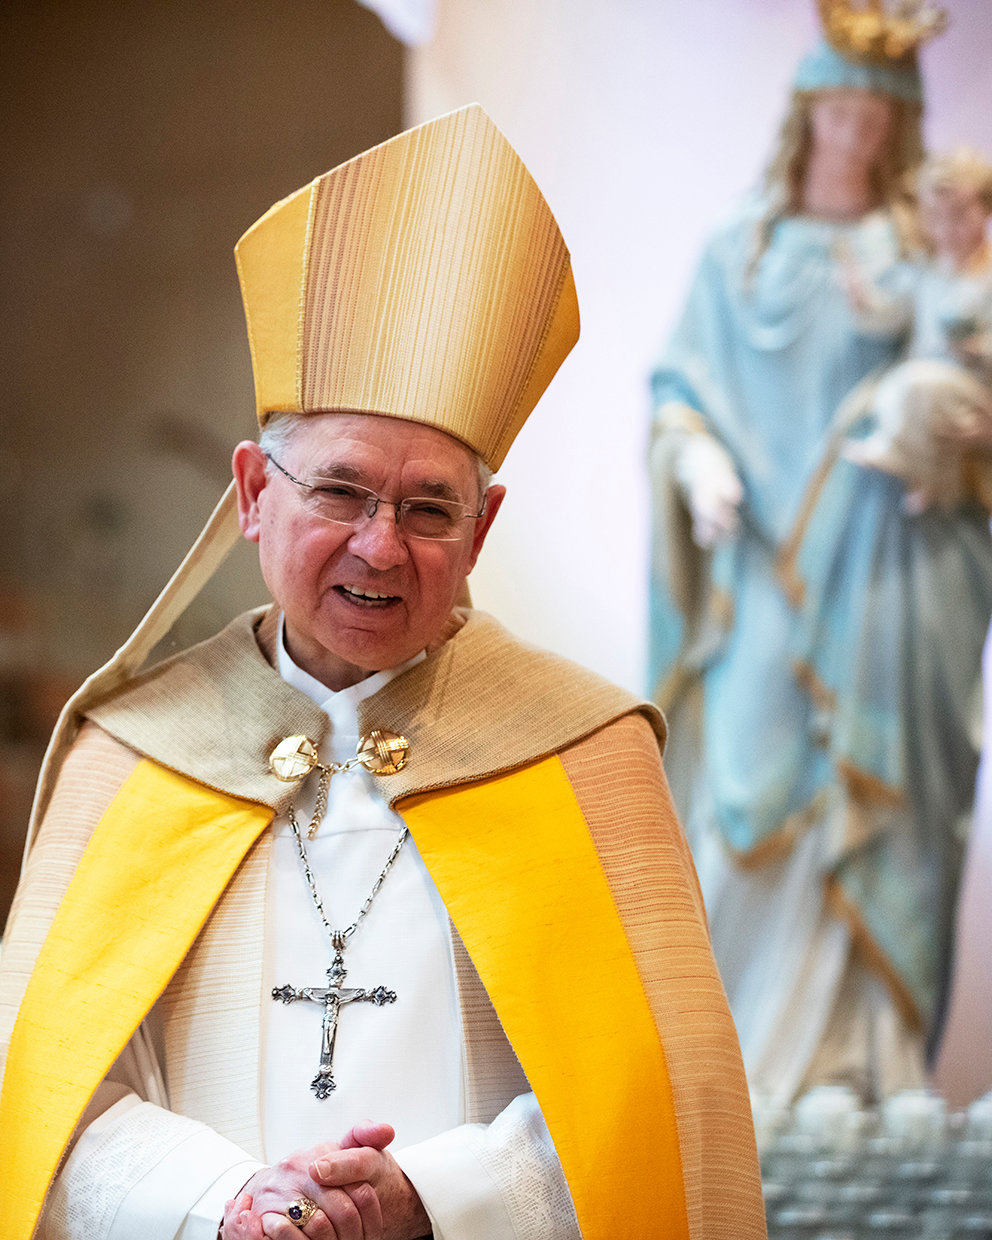 Archbishop Jose H. Gomez of Los Angeles, president of the U.S. Conference of Catholic Bishops, is seen May 1, 2020, from the Cathedral of Our Lady of the Angels in Los Angeles.